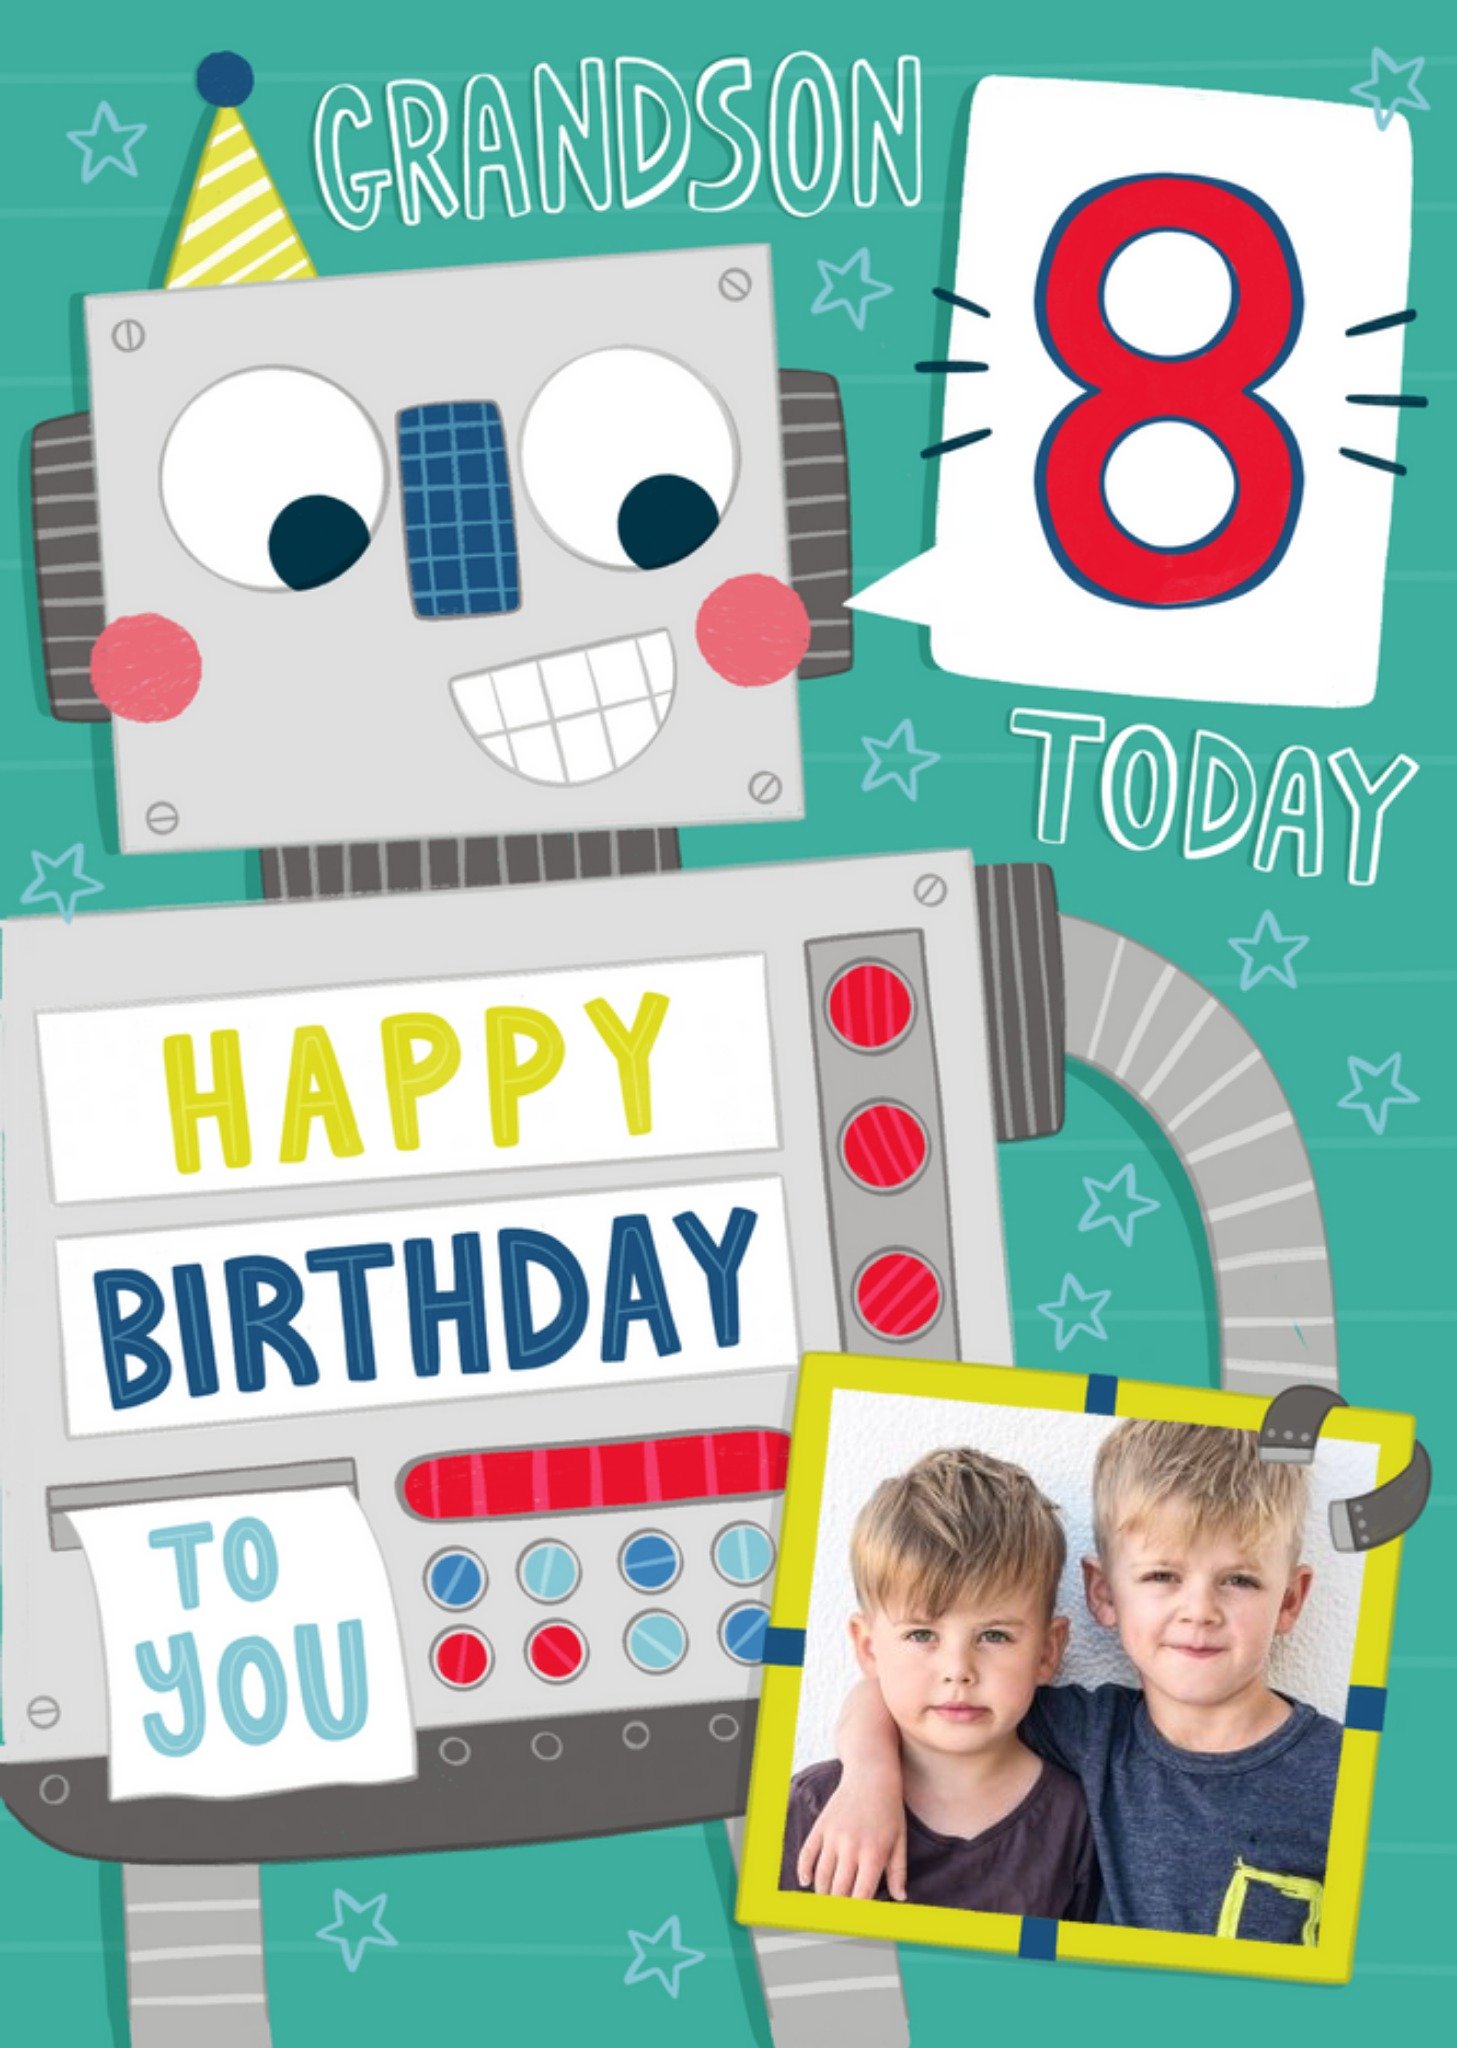 Moonpig Grandson 8 Today Happy Birthday To You Robot Photo Upload Card, Large